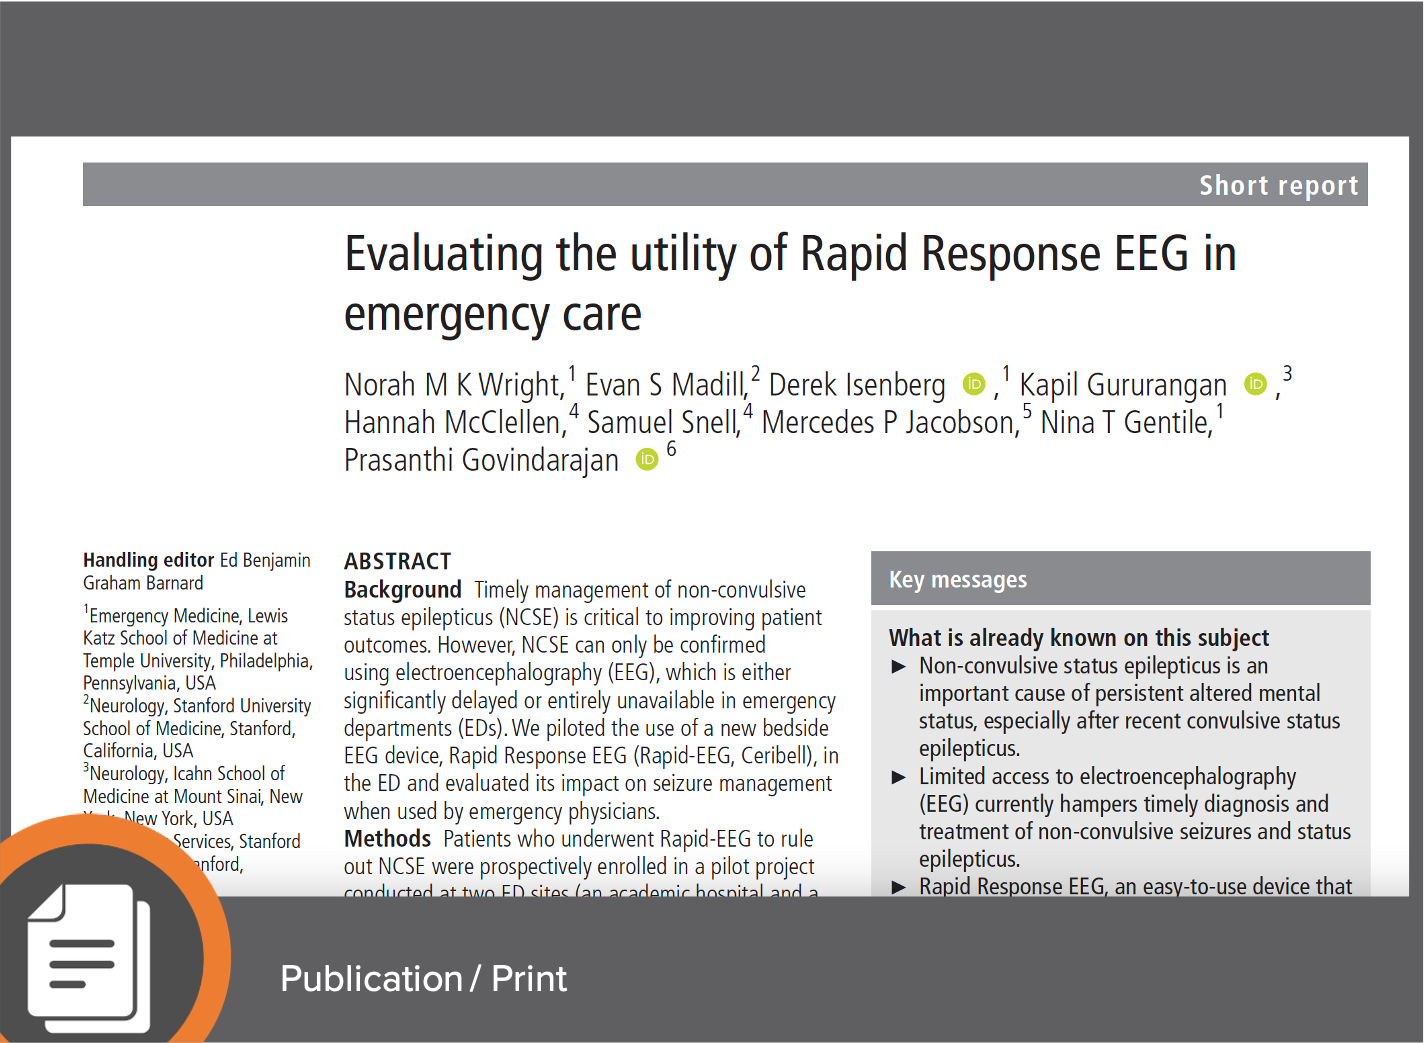 Evaluating the Utility of Rapid Response EEG in Emergency Care